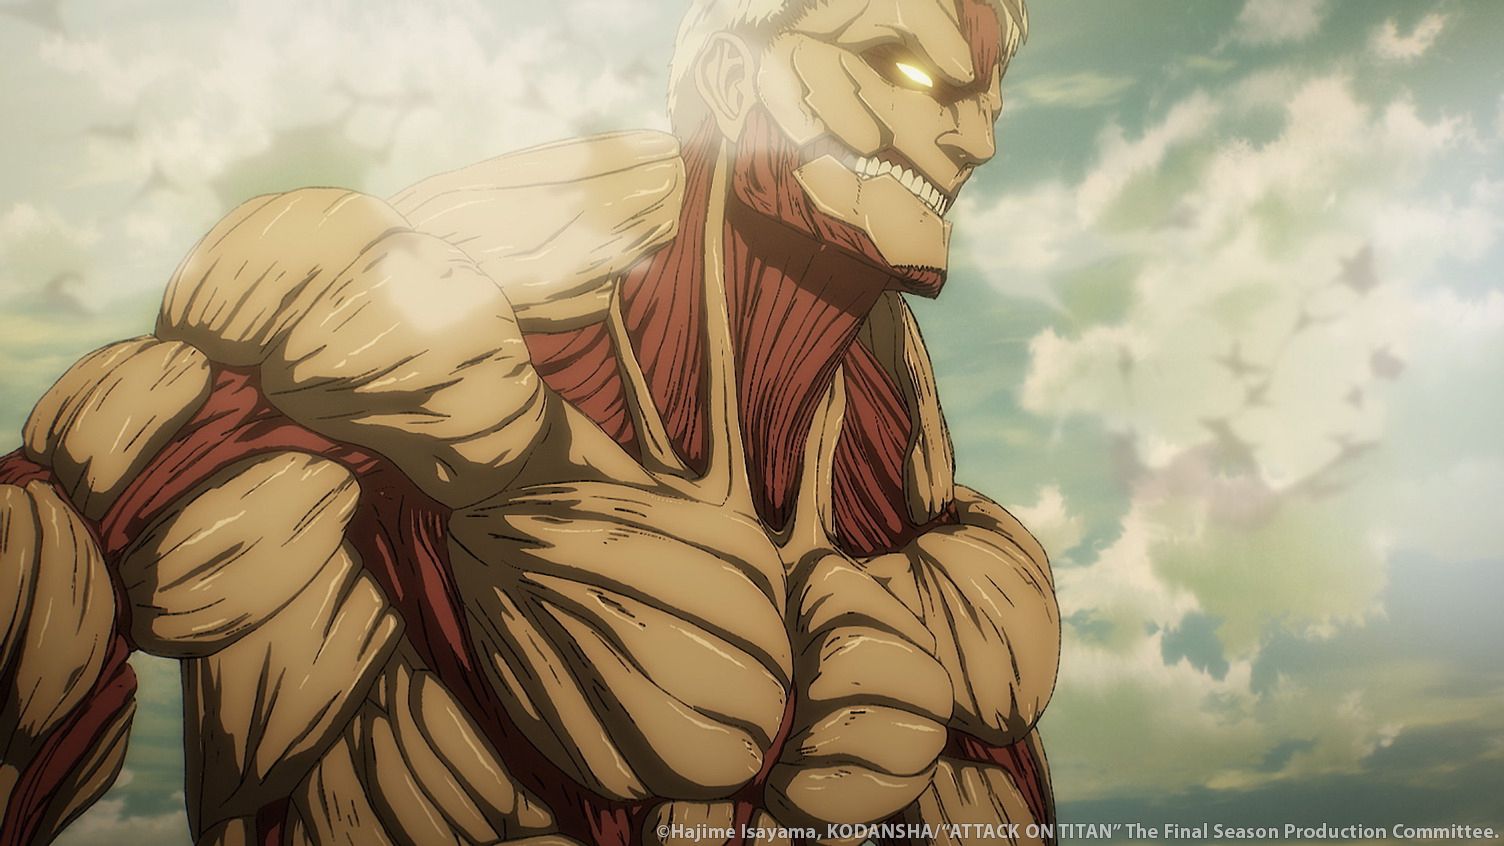 Will the final season of Attack on Titan go down as the best anime